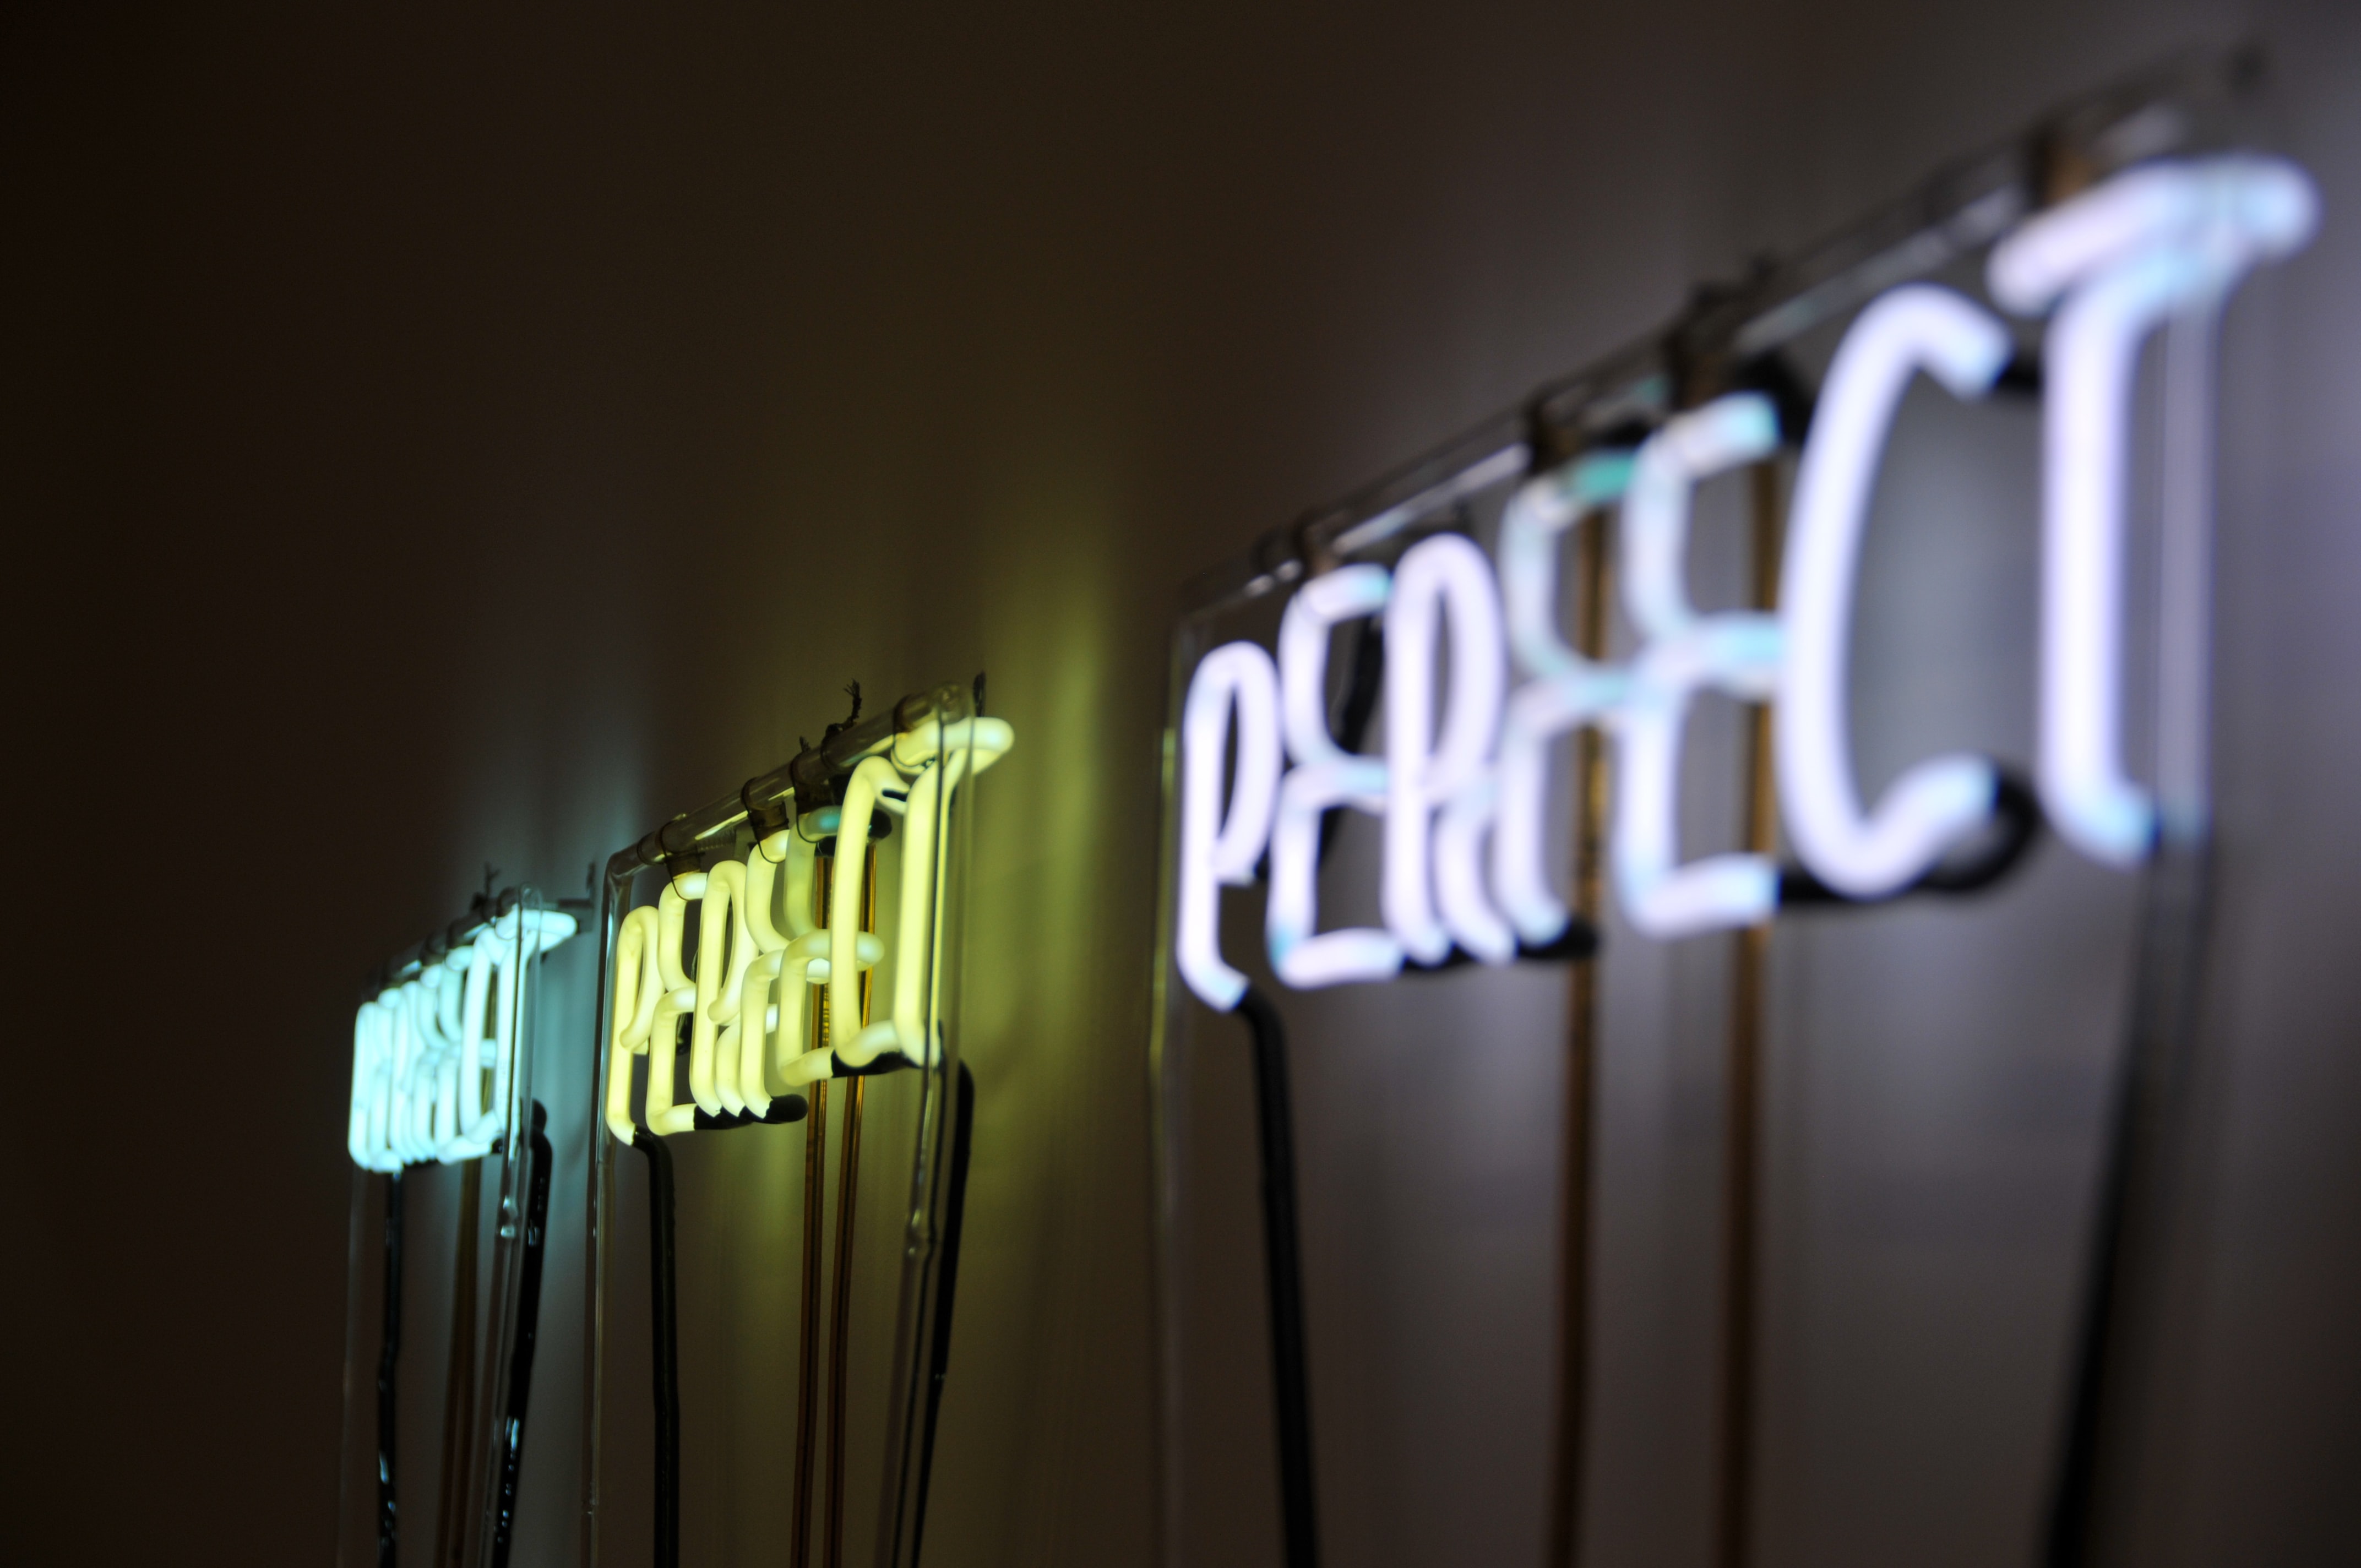 Perfect neon signage mounted on wall